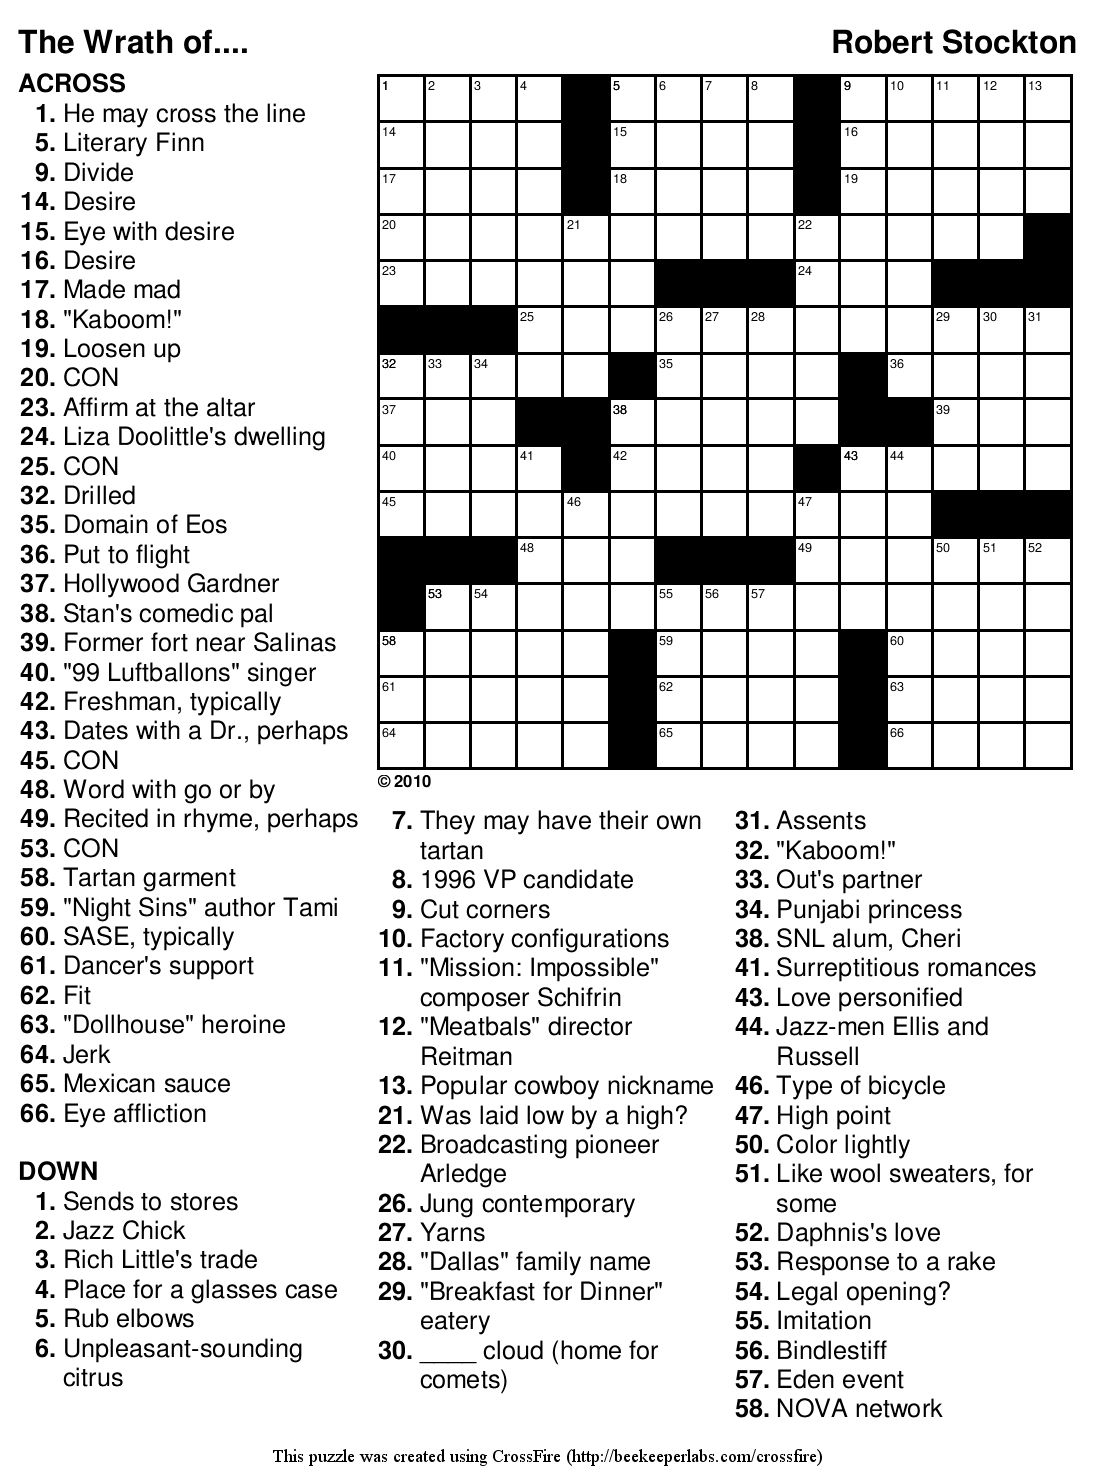 Easy Printable Crossword Puzzles With Answers | Printable Crossword Puzzles What You Have To Do To Interpret The Answers Crossword